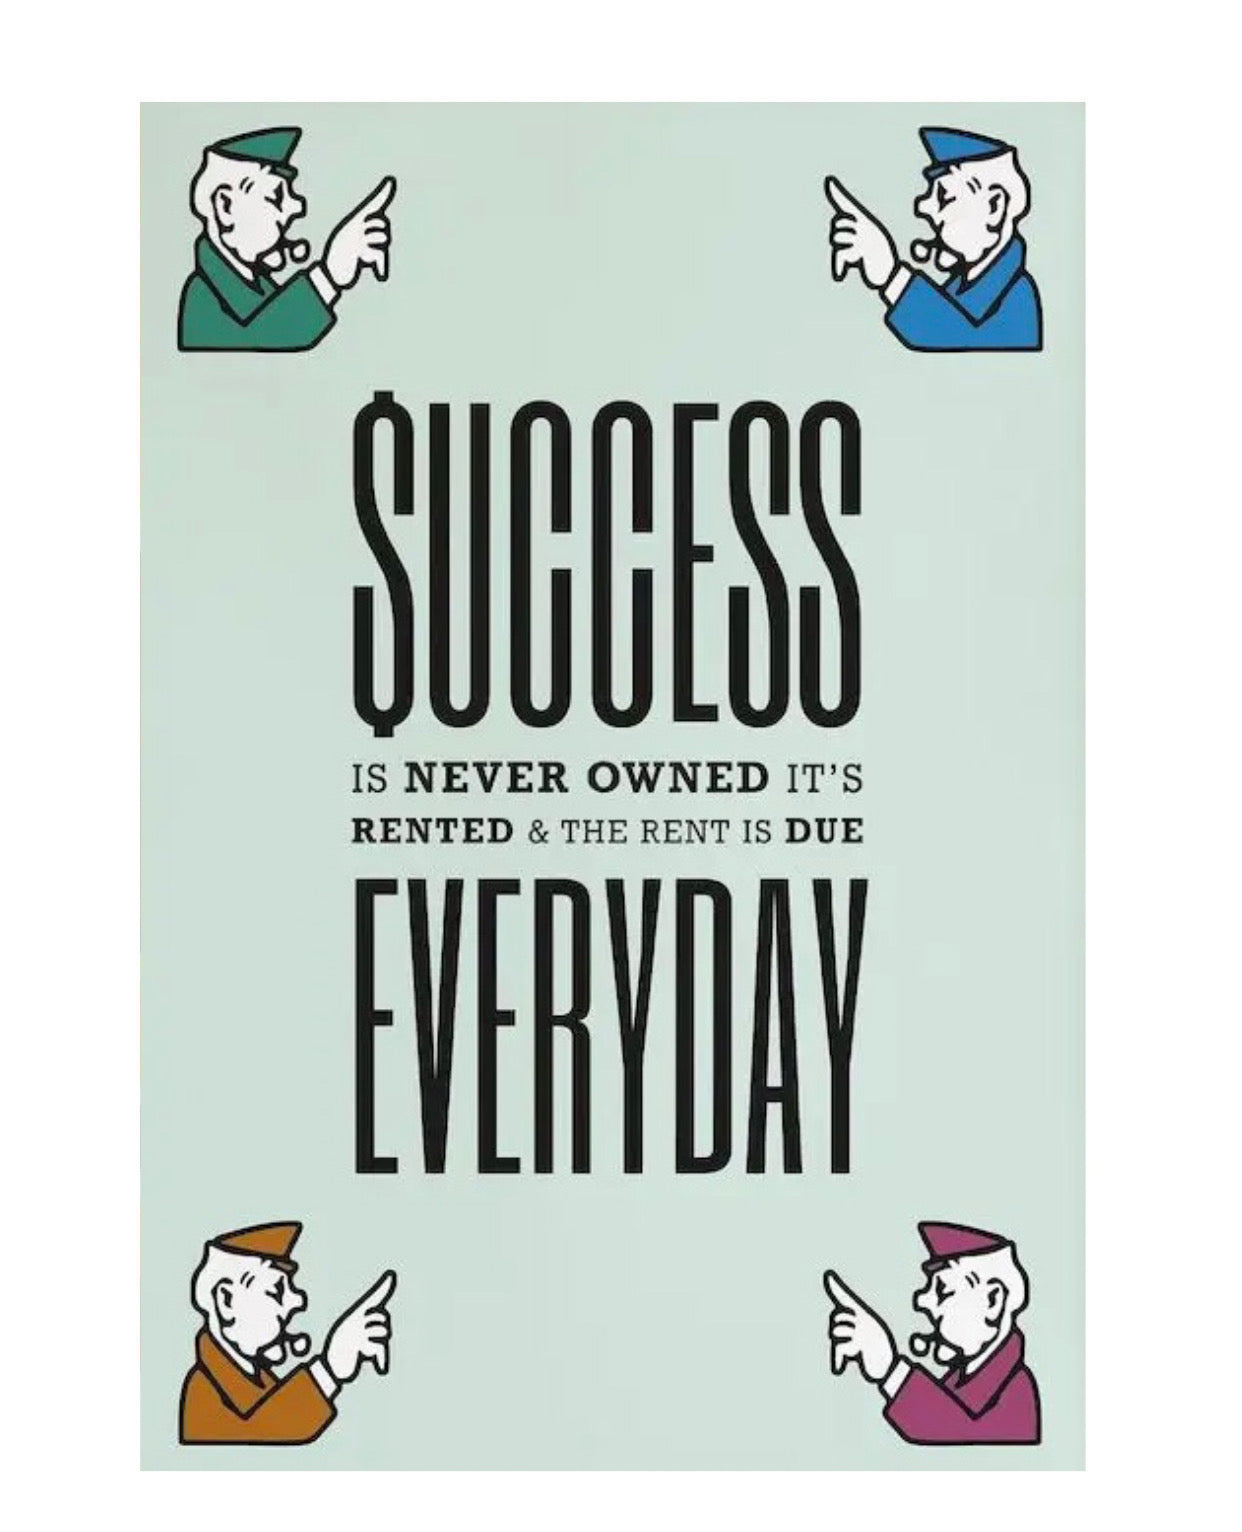 "success is never owned it's rented & the rent is due everyday" poster